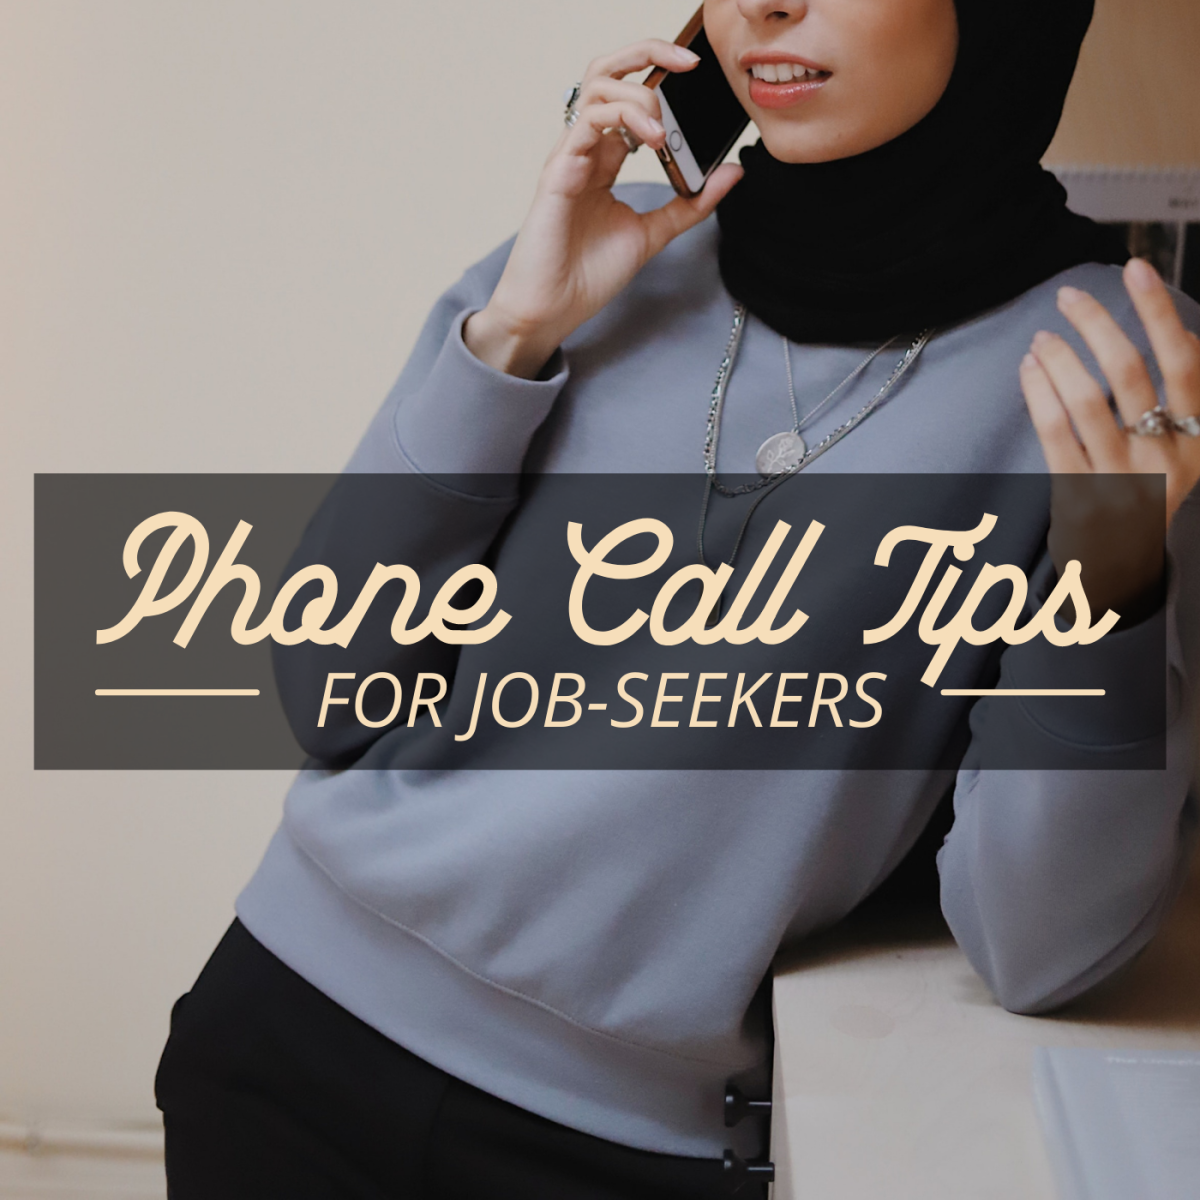 Oftentimes, prospective employers' first impressions are based on a phone call. Make yours count! 